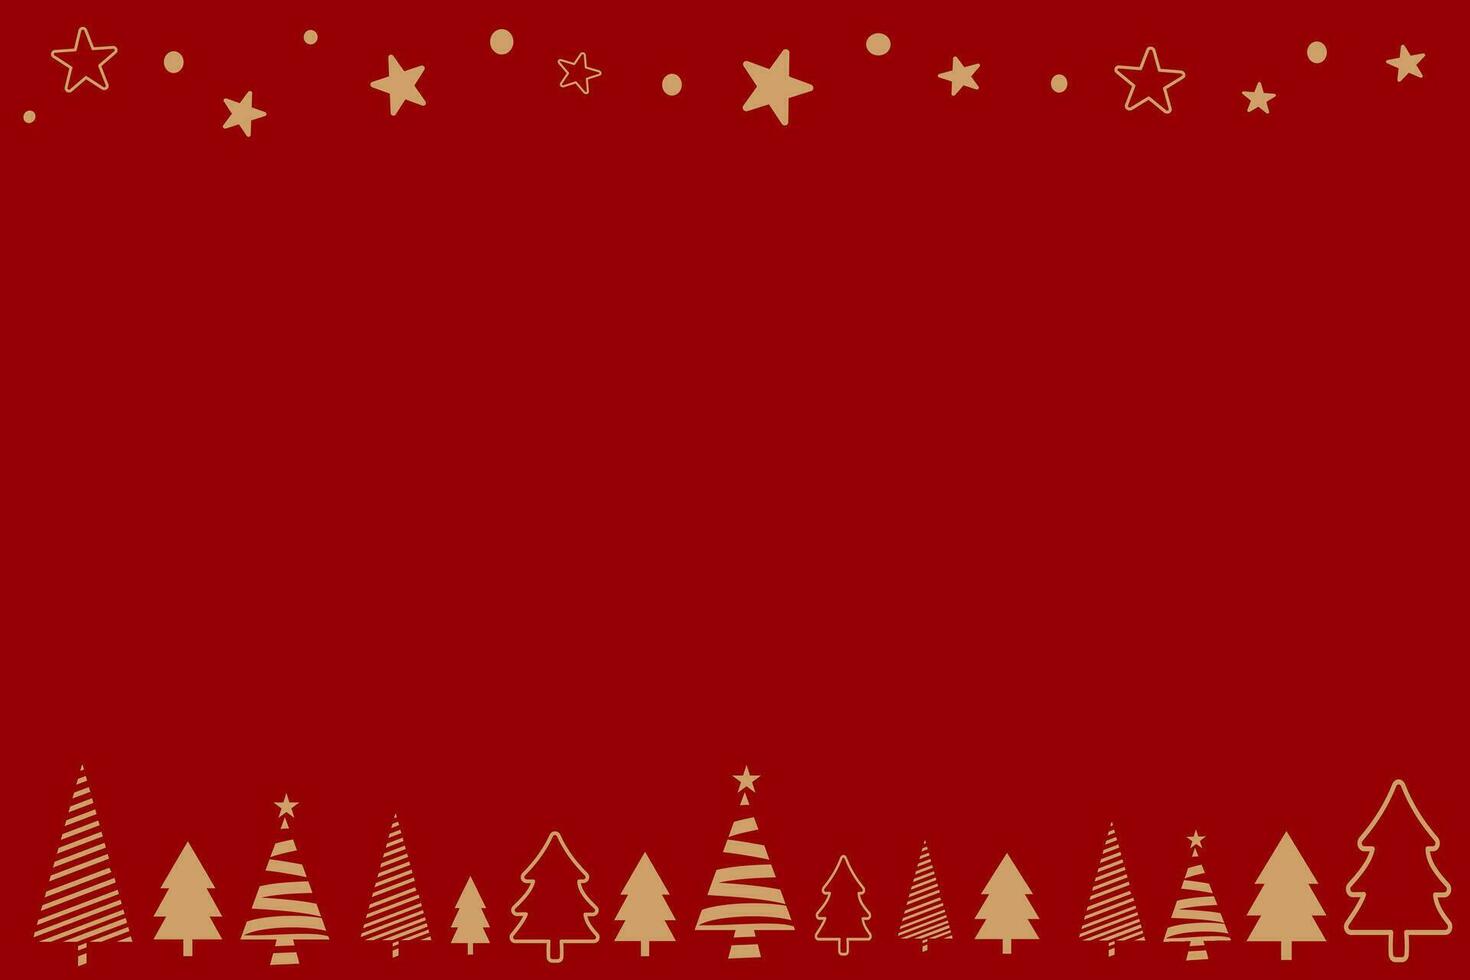 Red Christmas background with minimal Christmas trees, stars, and Christmas symbols vector